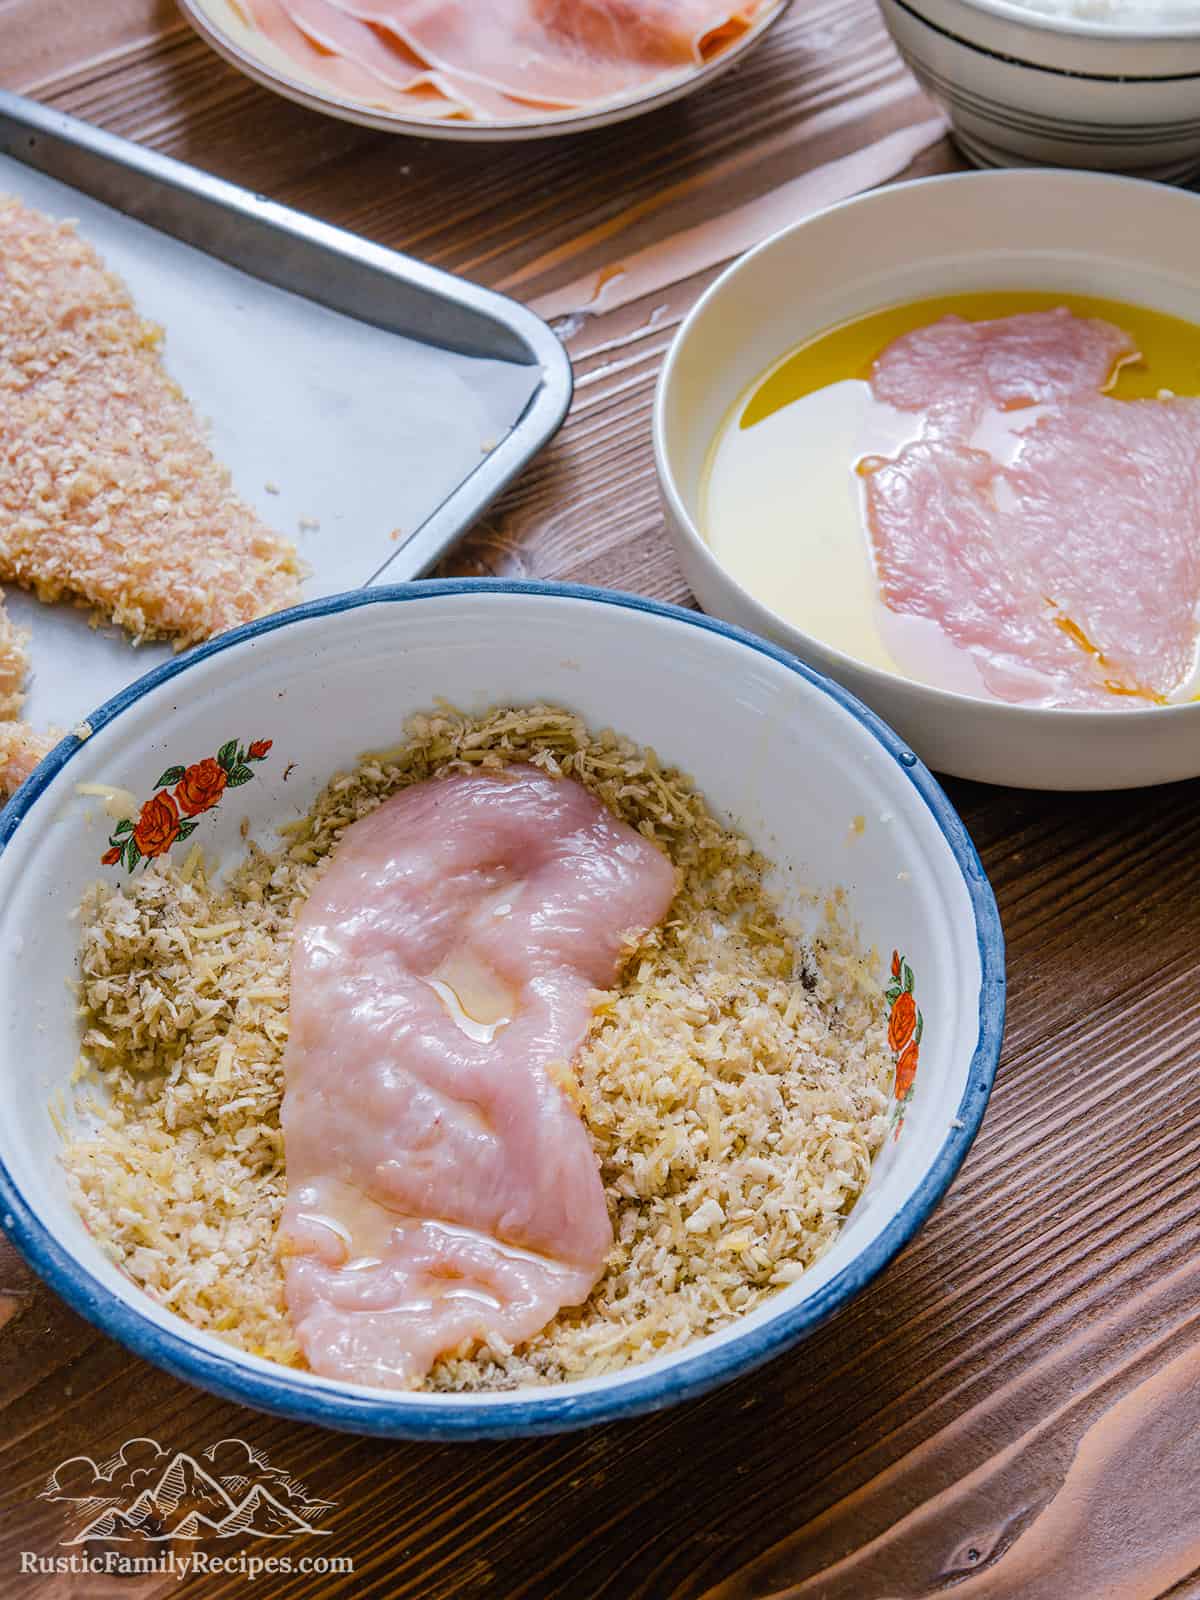 Breading sliced chicken breasts in a white bowl